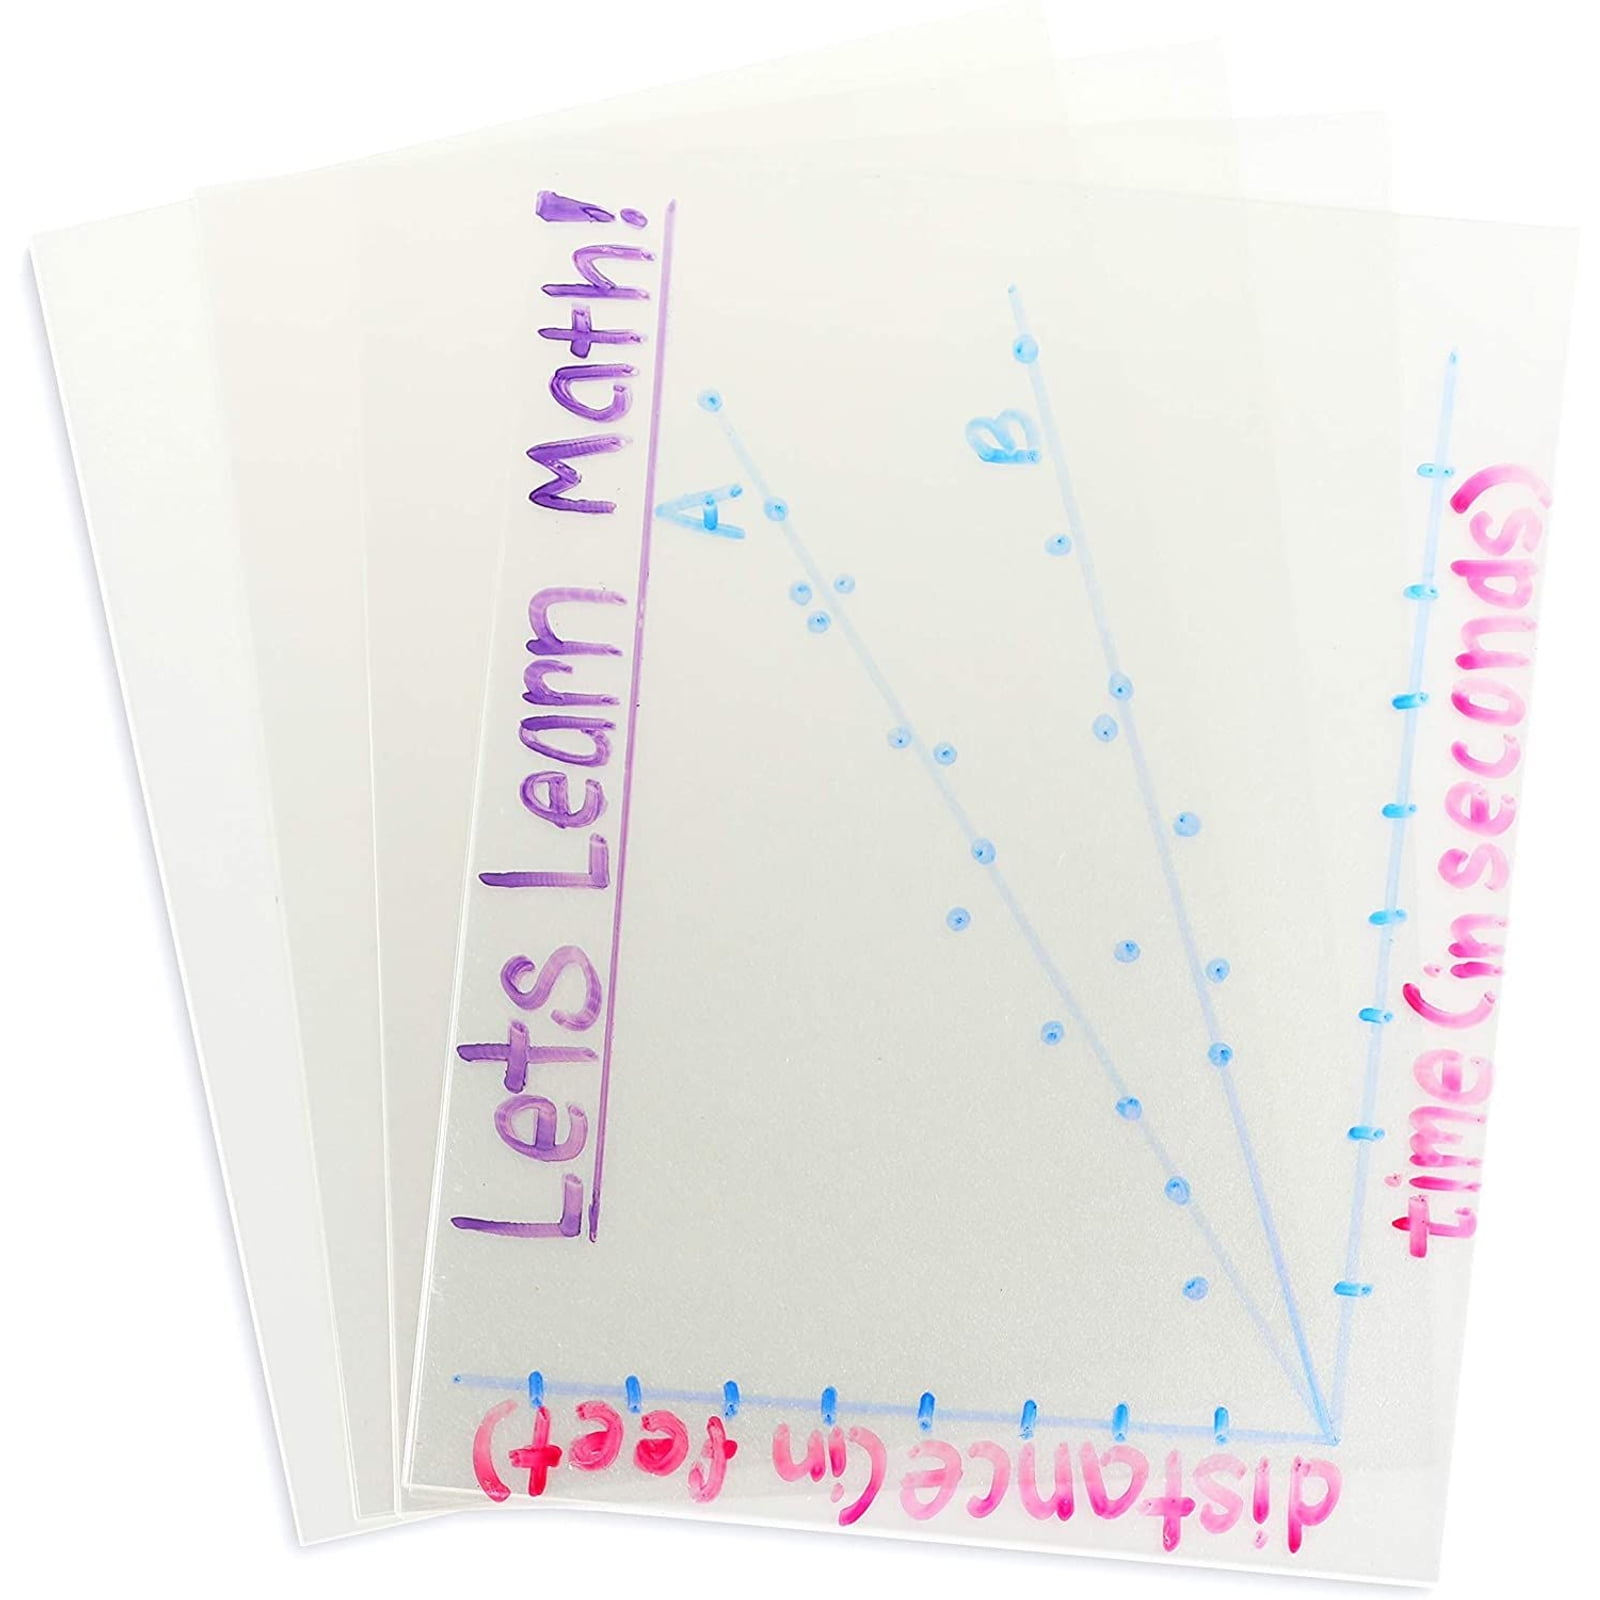 Transparency Film Paper Clear for Overhead Projector Transparencies and Inkjet Screen Prints 8.5 x 11,25sheets 